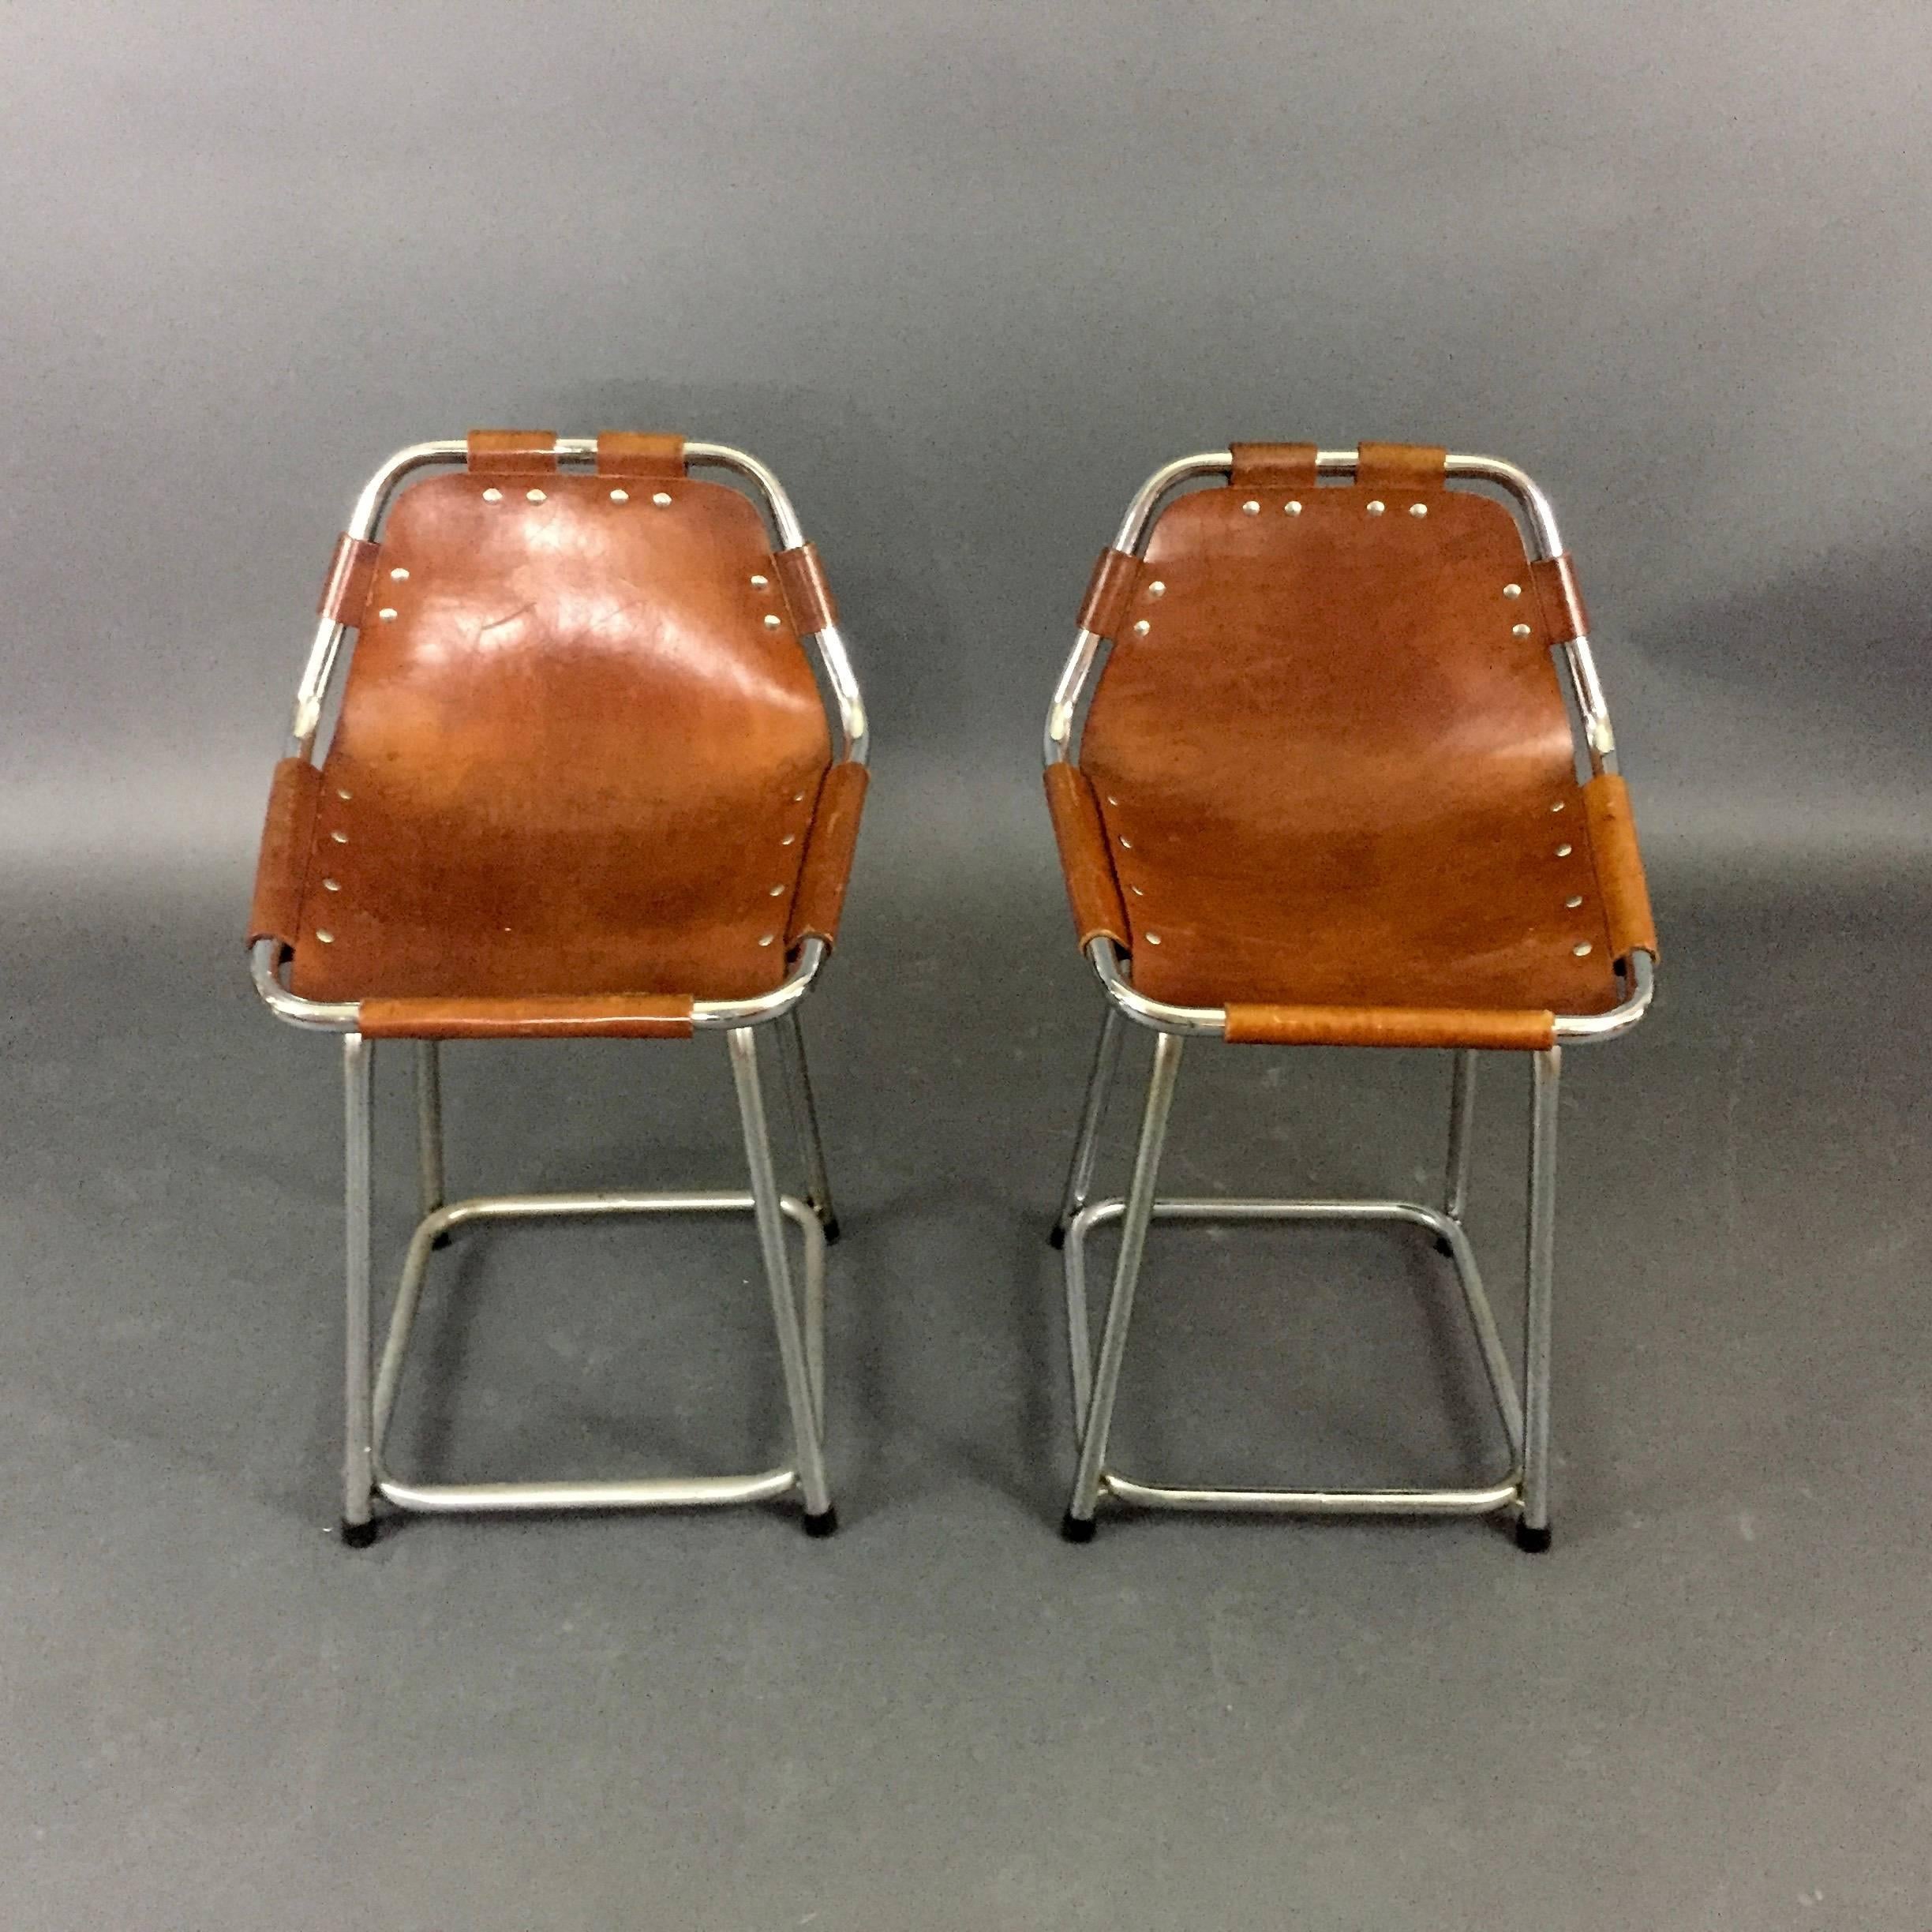 These famous stool in the style of Charlotte Perriand were selected for the ski resorts at Les Arcs in Savoie in the late 1960s, produced by Cassina in Italy. Perfect patina saddle leather is attached to tuber chrome frames with rivets and leather